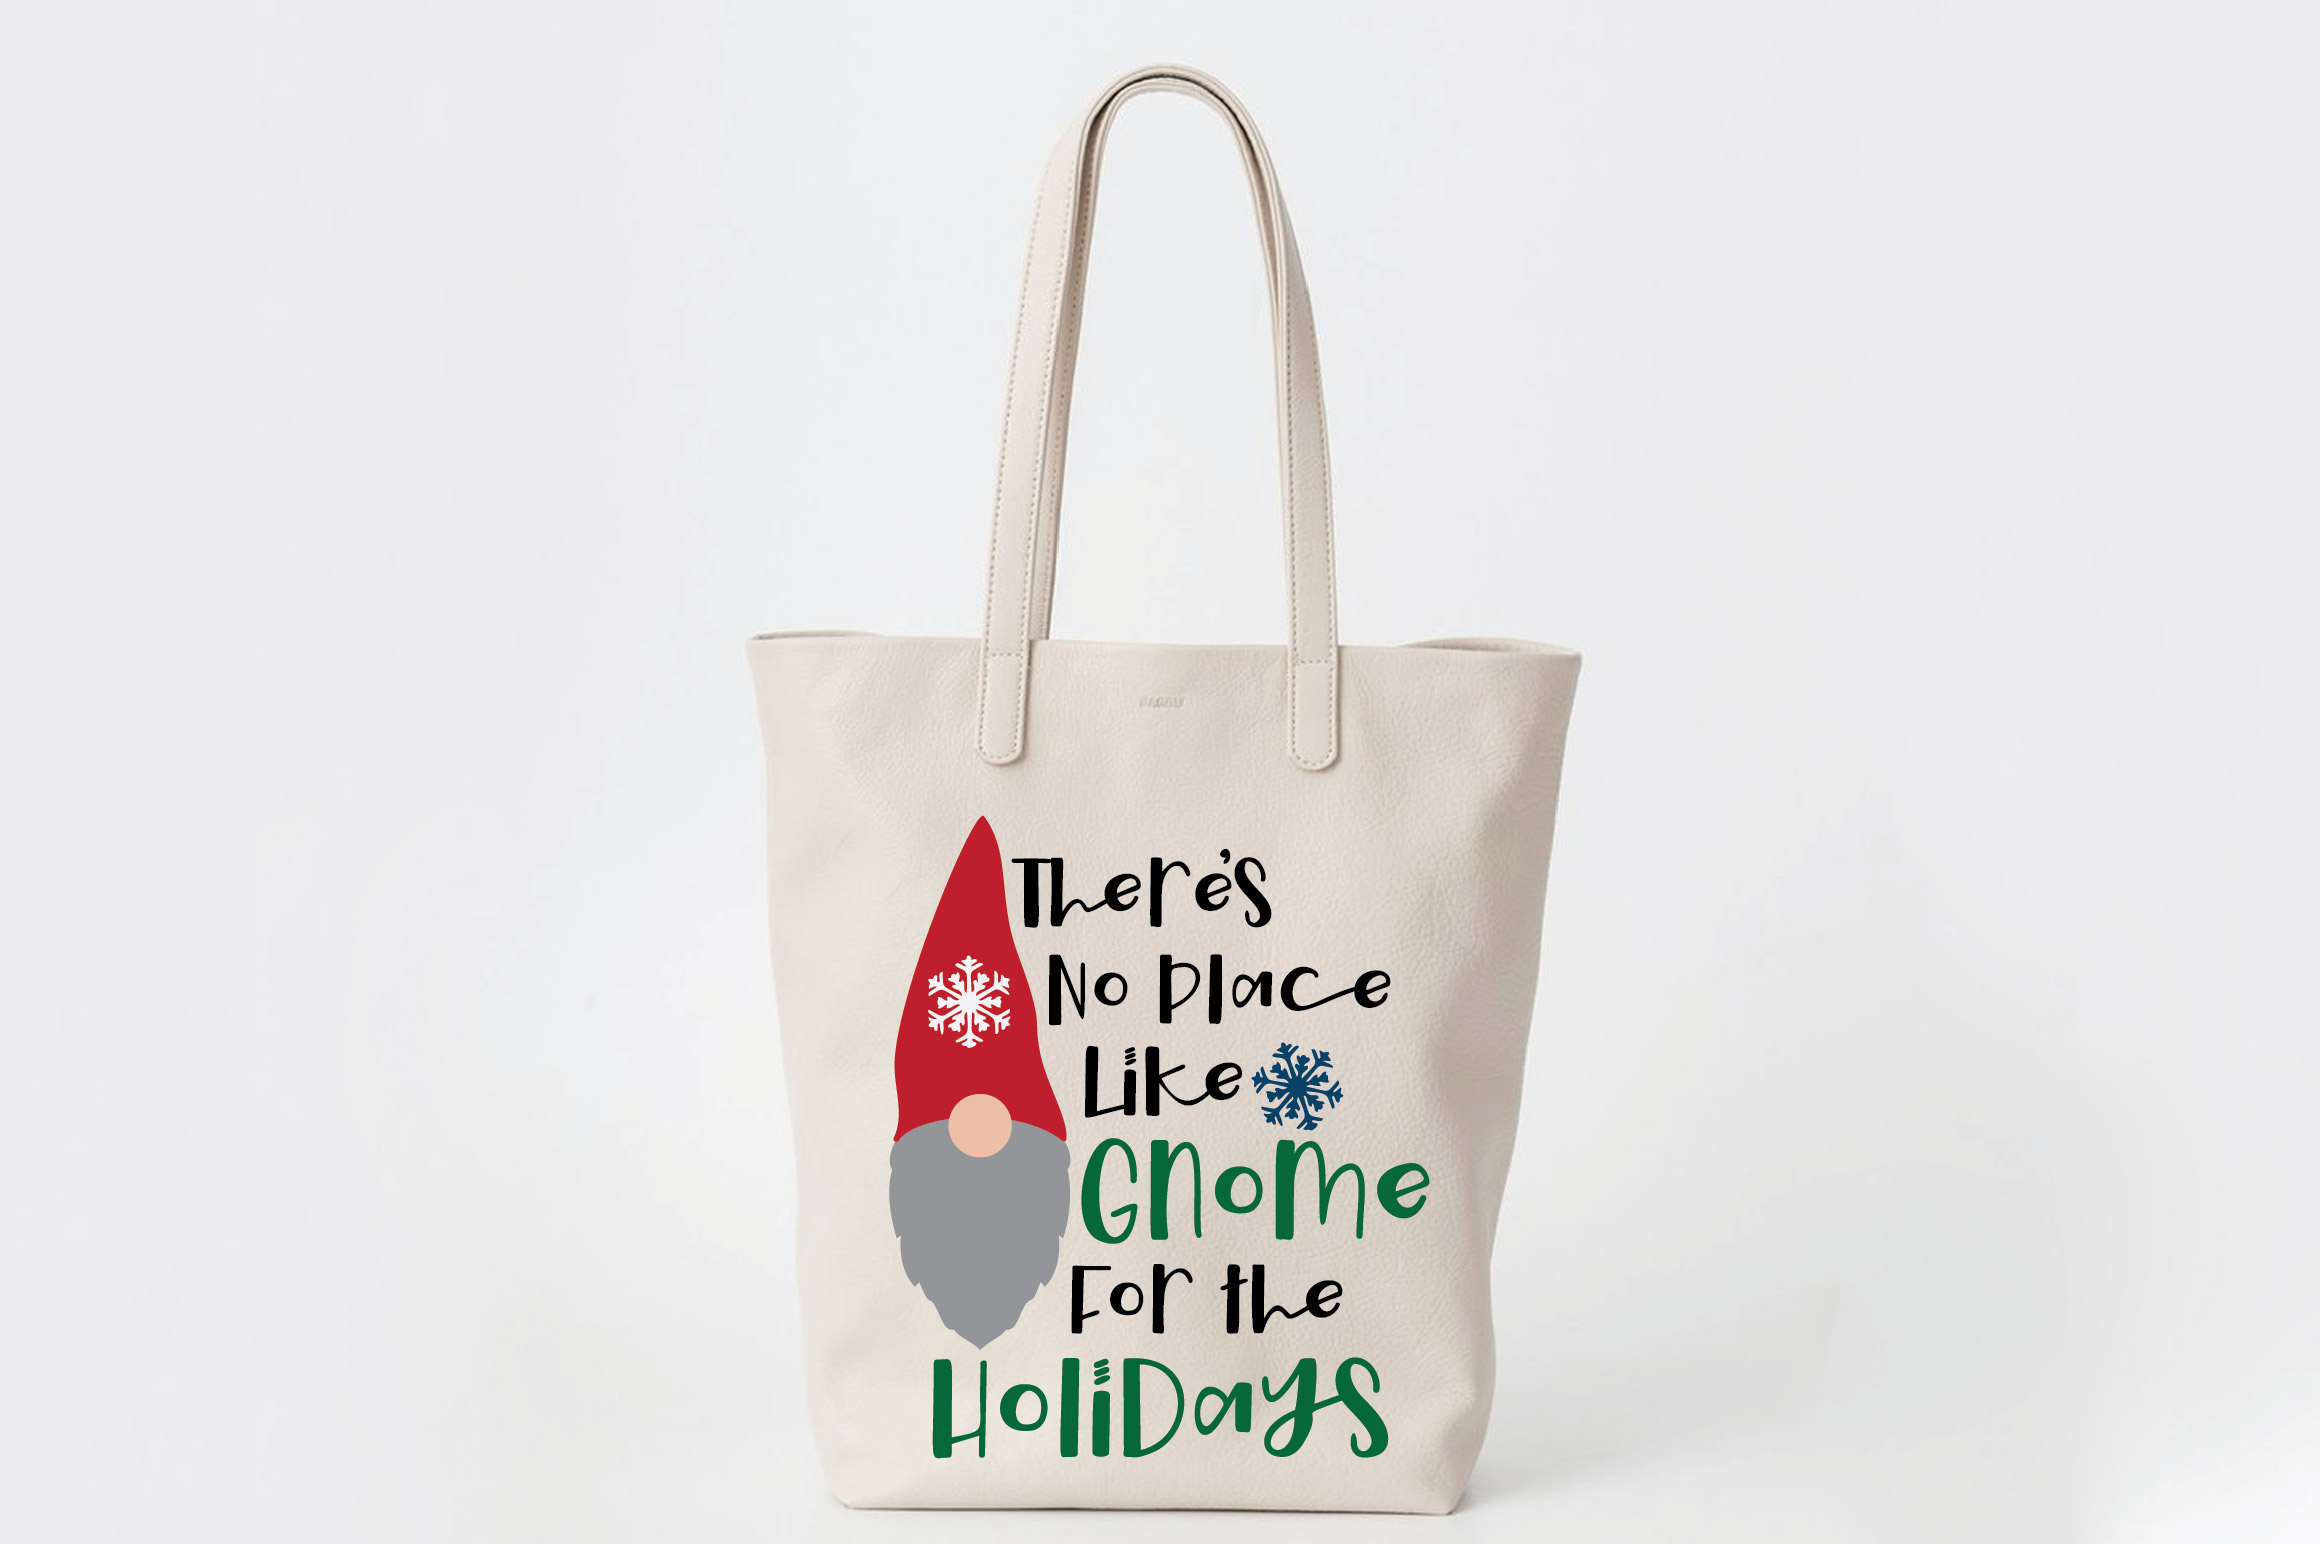 Download There's No Place Like Gnome for the Holidays SVG Cut File